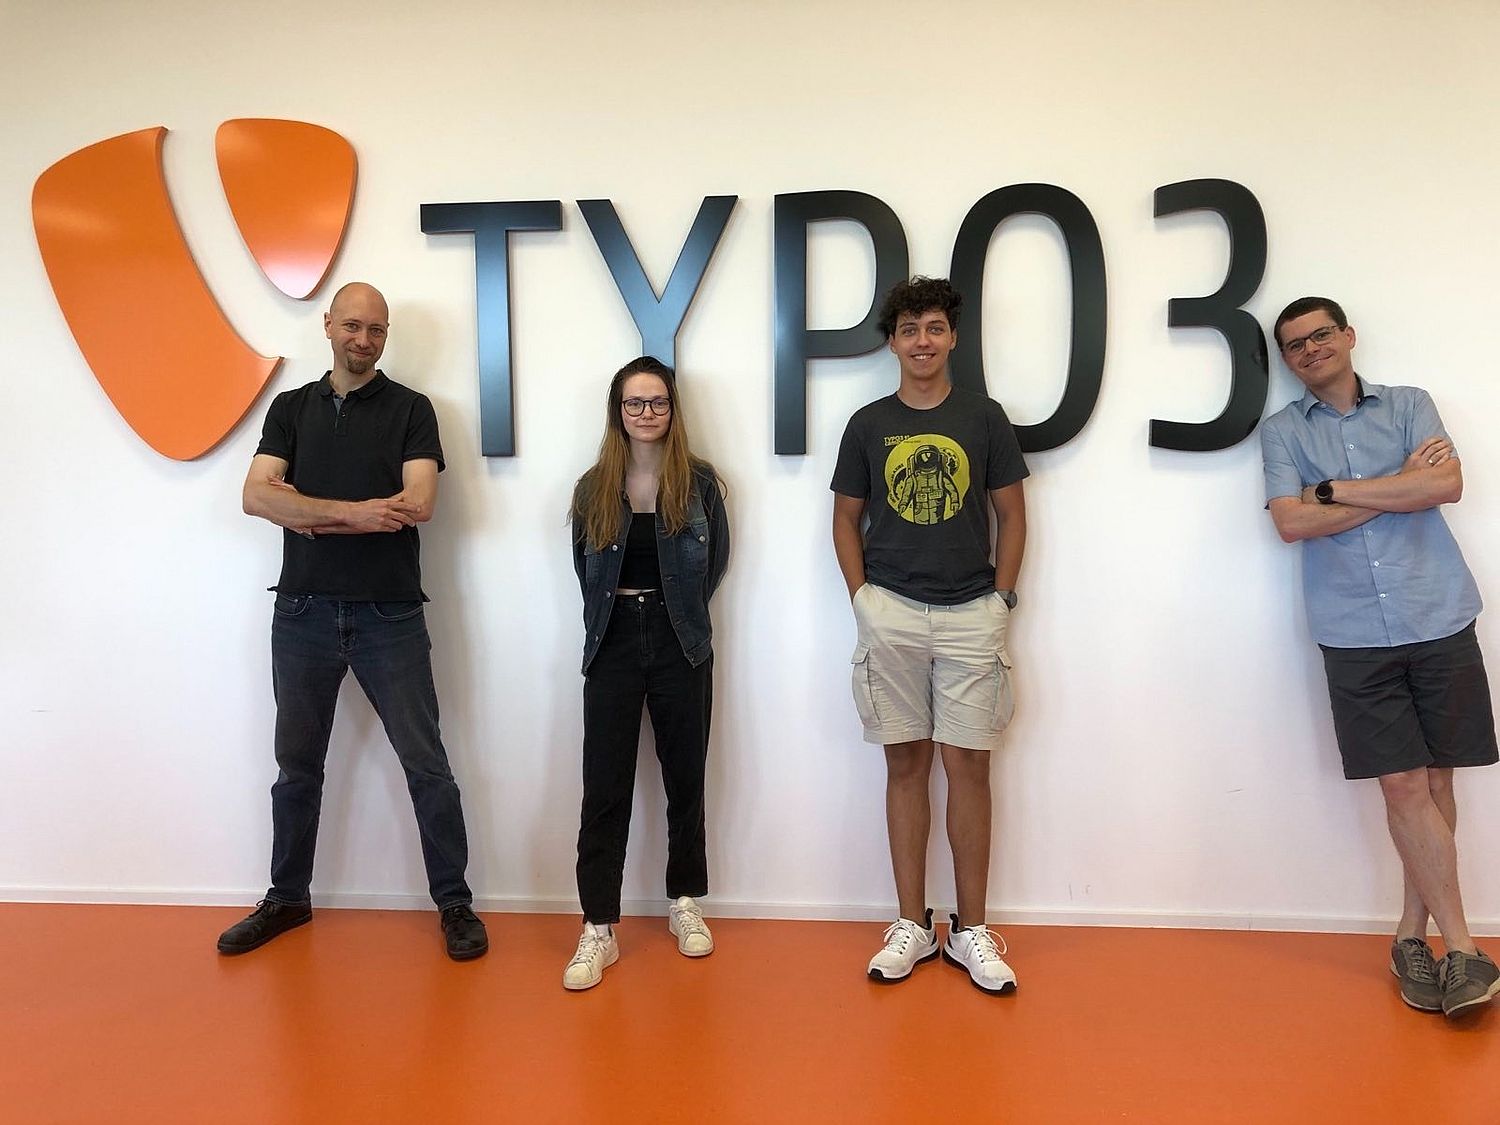 Four people in front of a white wall with the TYPO3 logo.